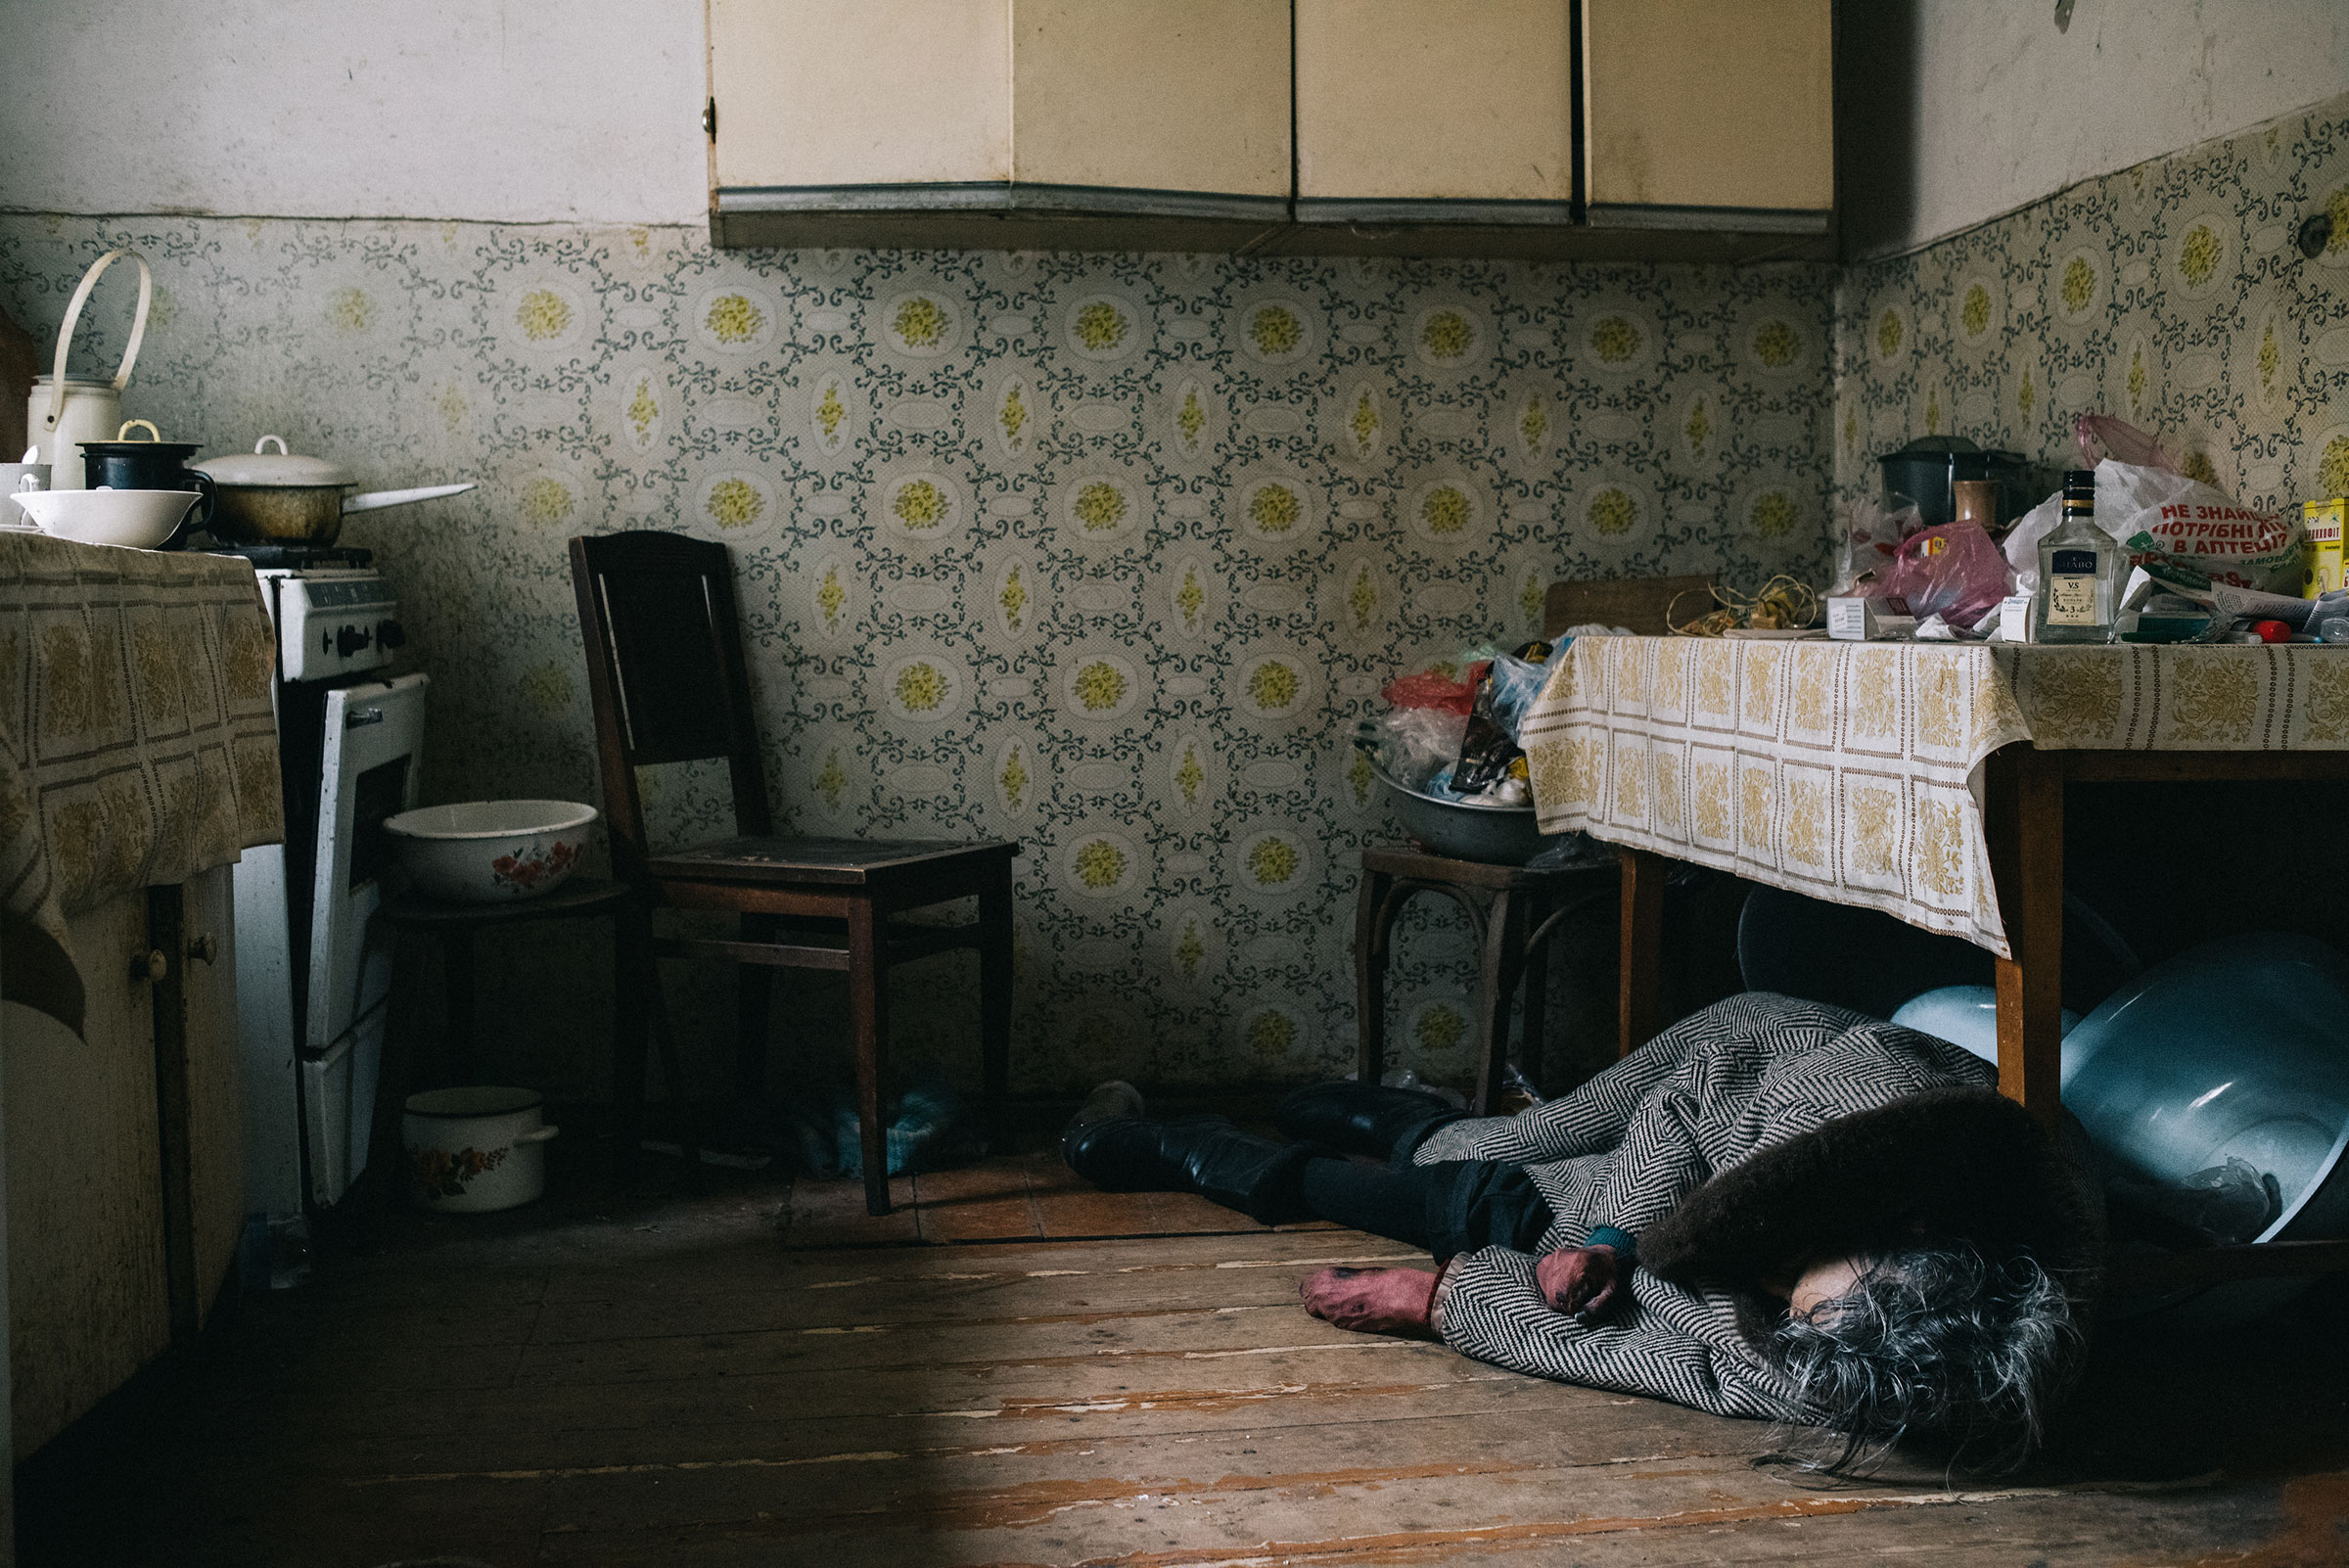 The victim of a mortar attack in Bucha lies in her kitchen on April 6. (Maxim Dondyuk)